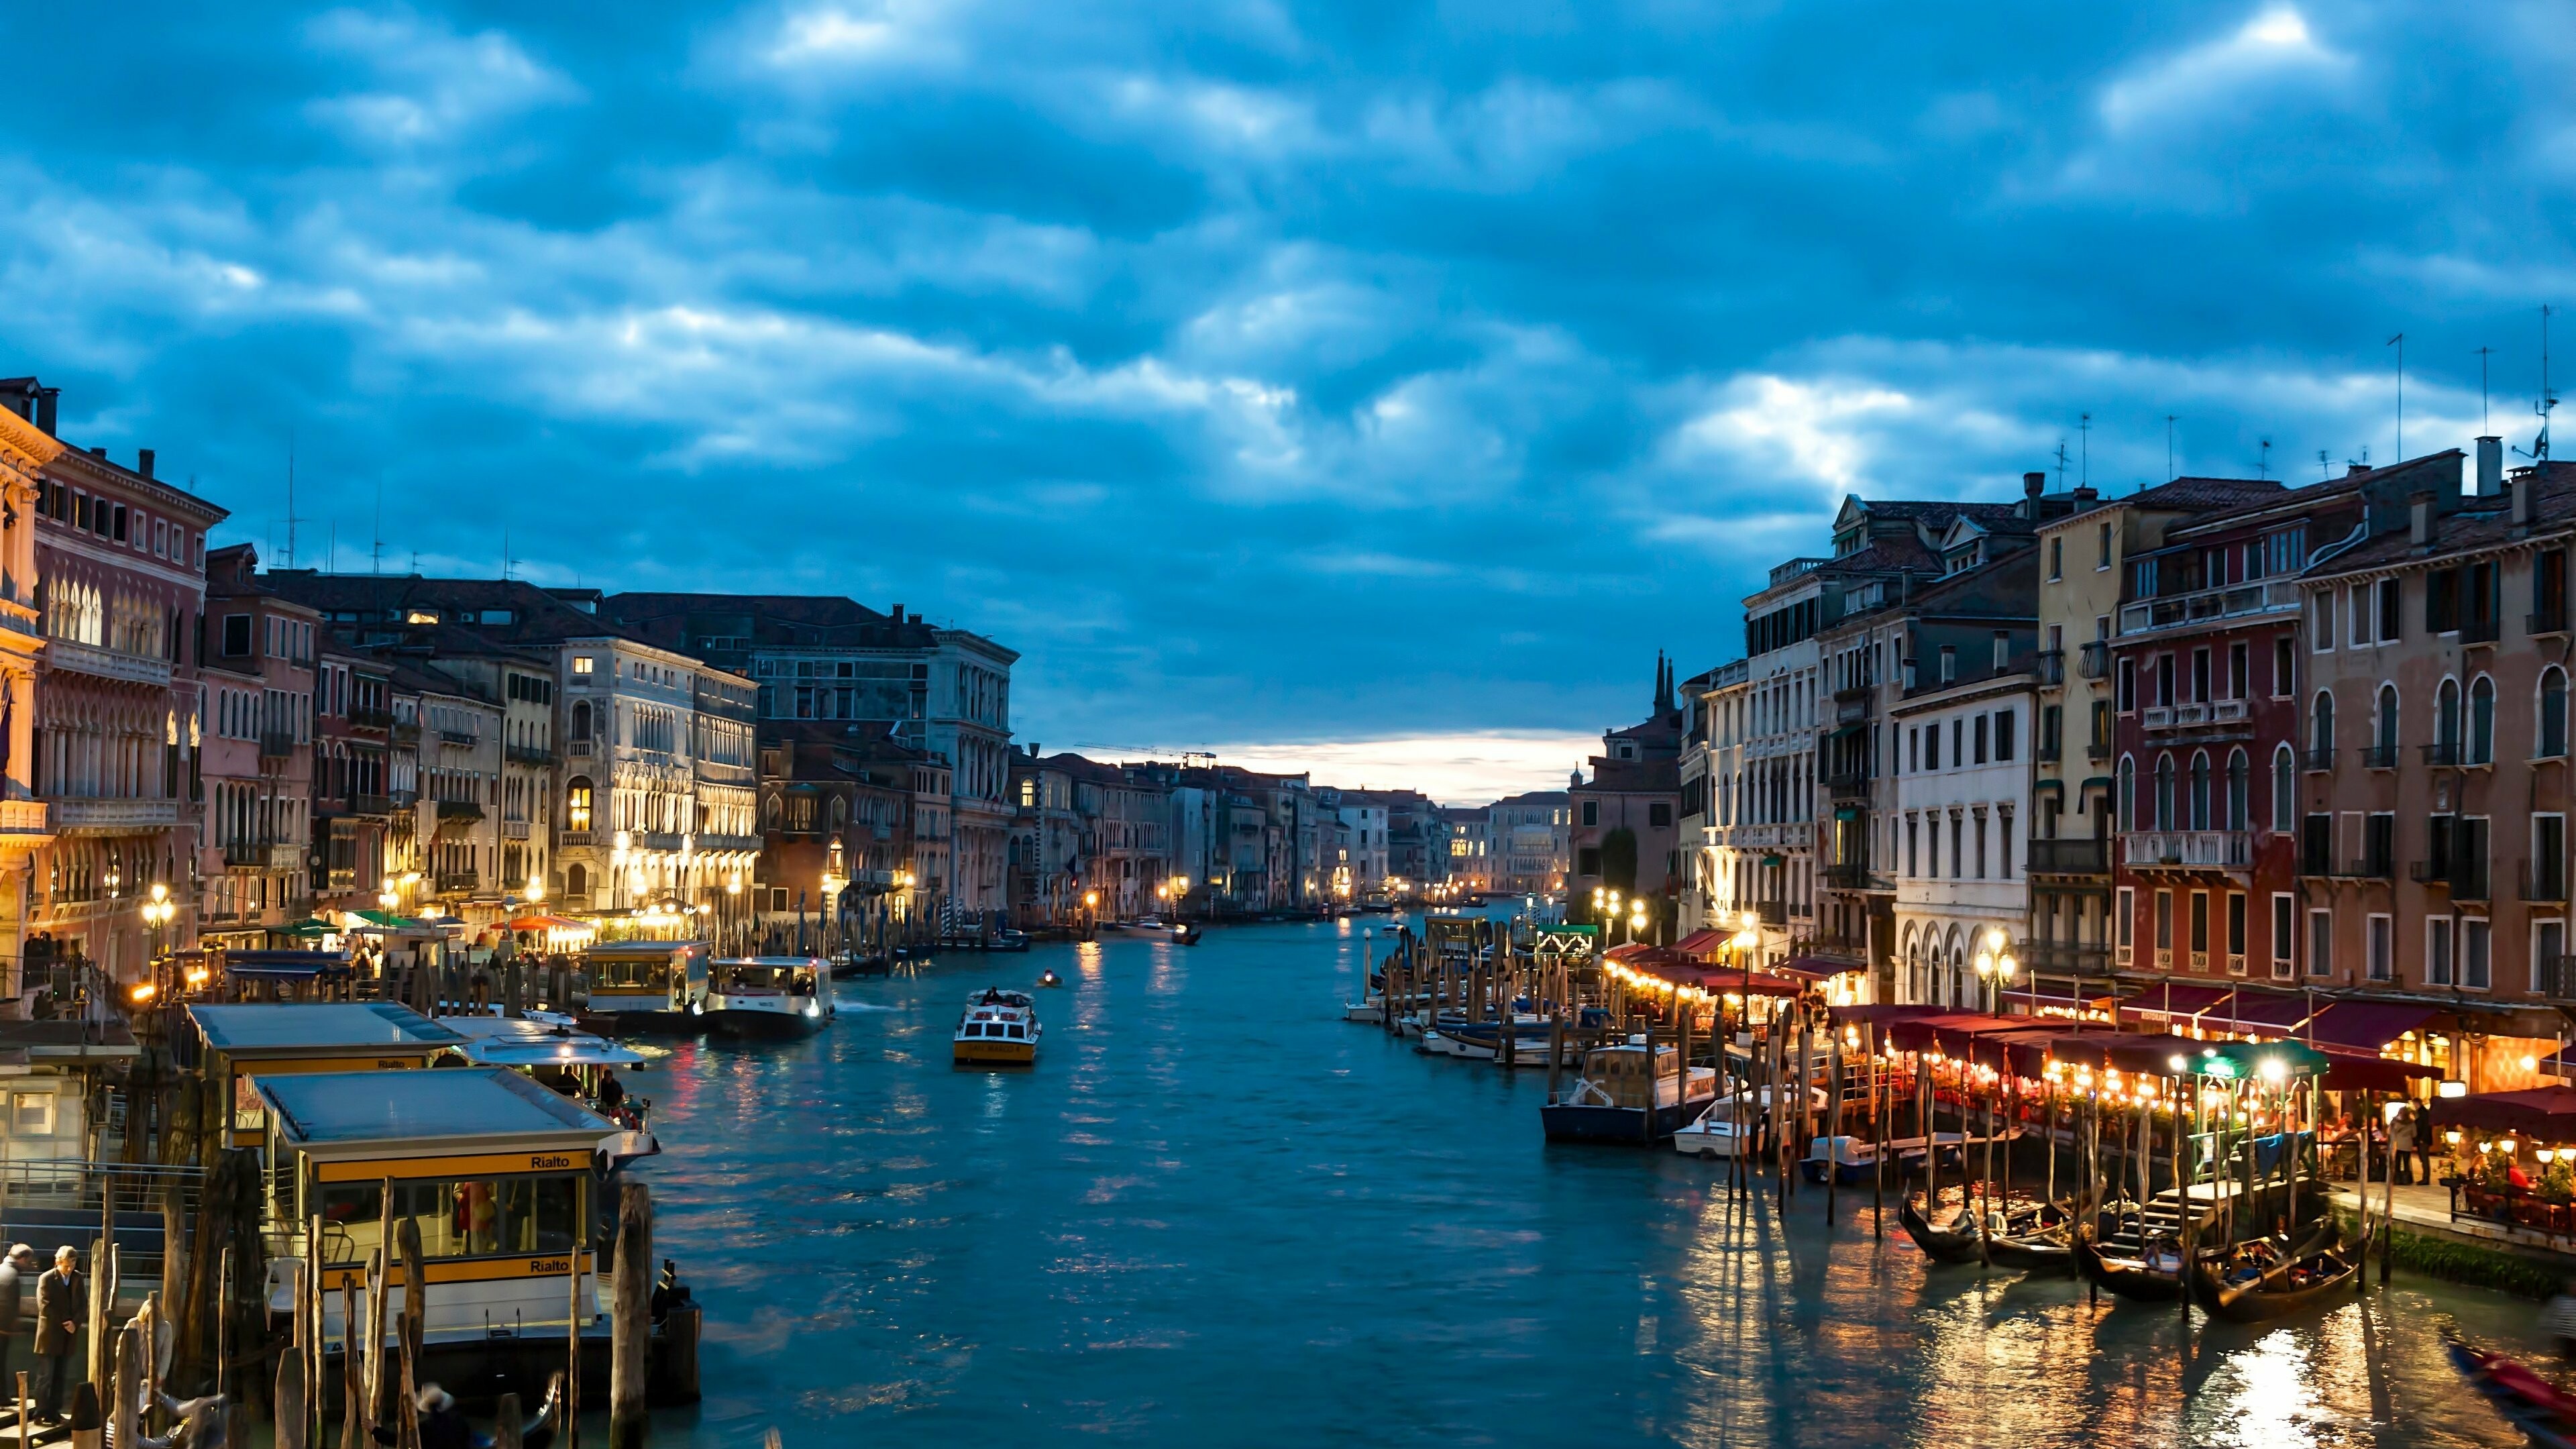 Italy: The tenth-largest country in Europe by land area, Venice. 3840x2160 4K Wallpaper.